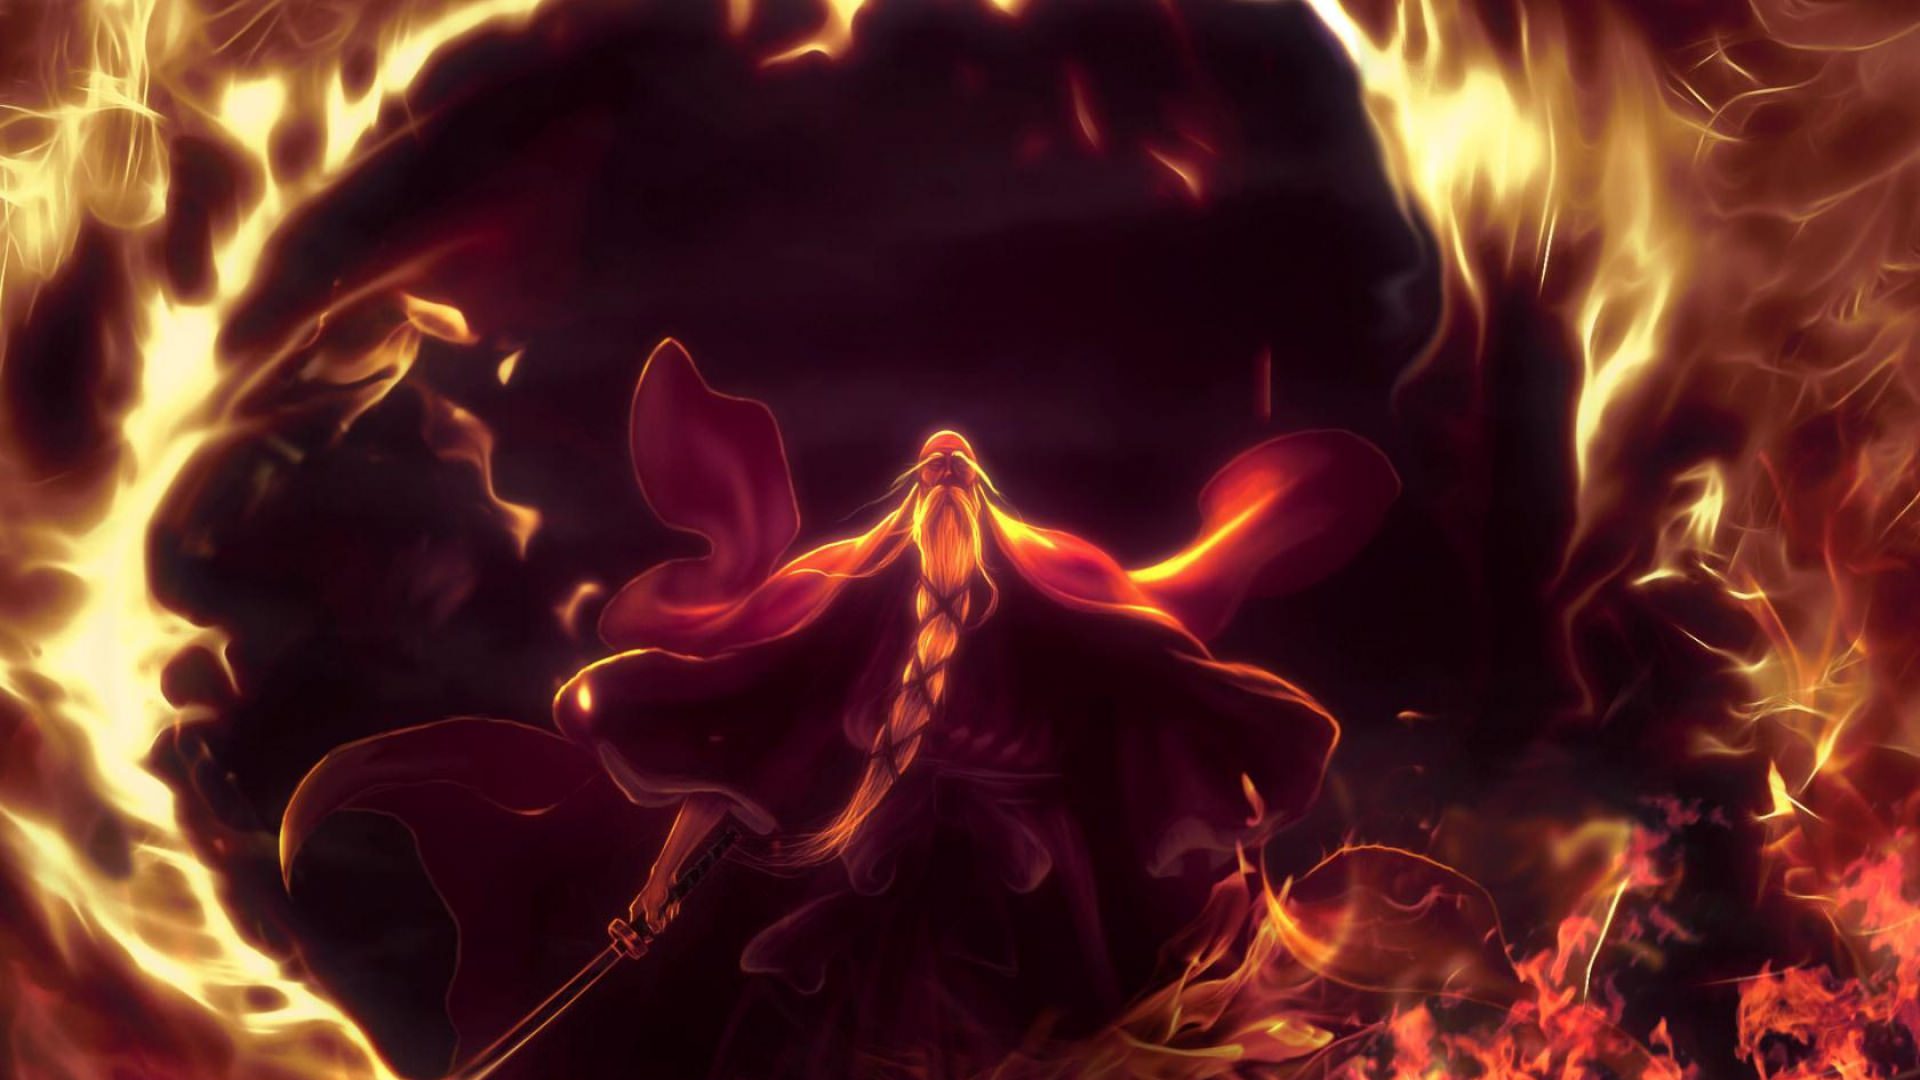 Old Magician with Fire Sword Wallpaper